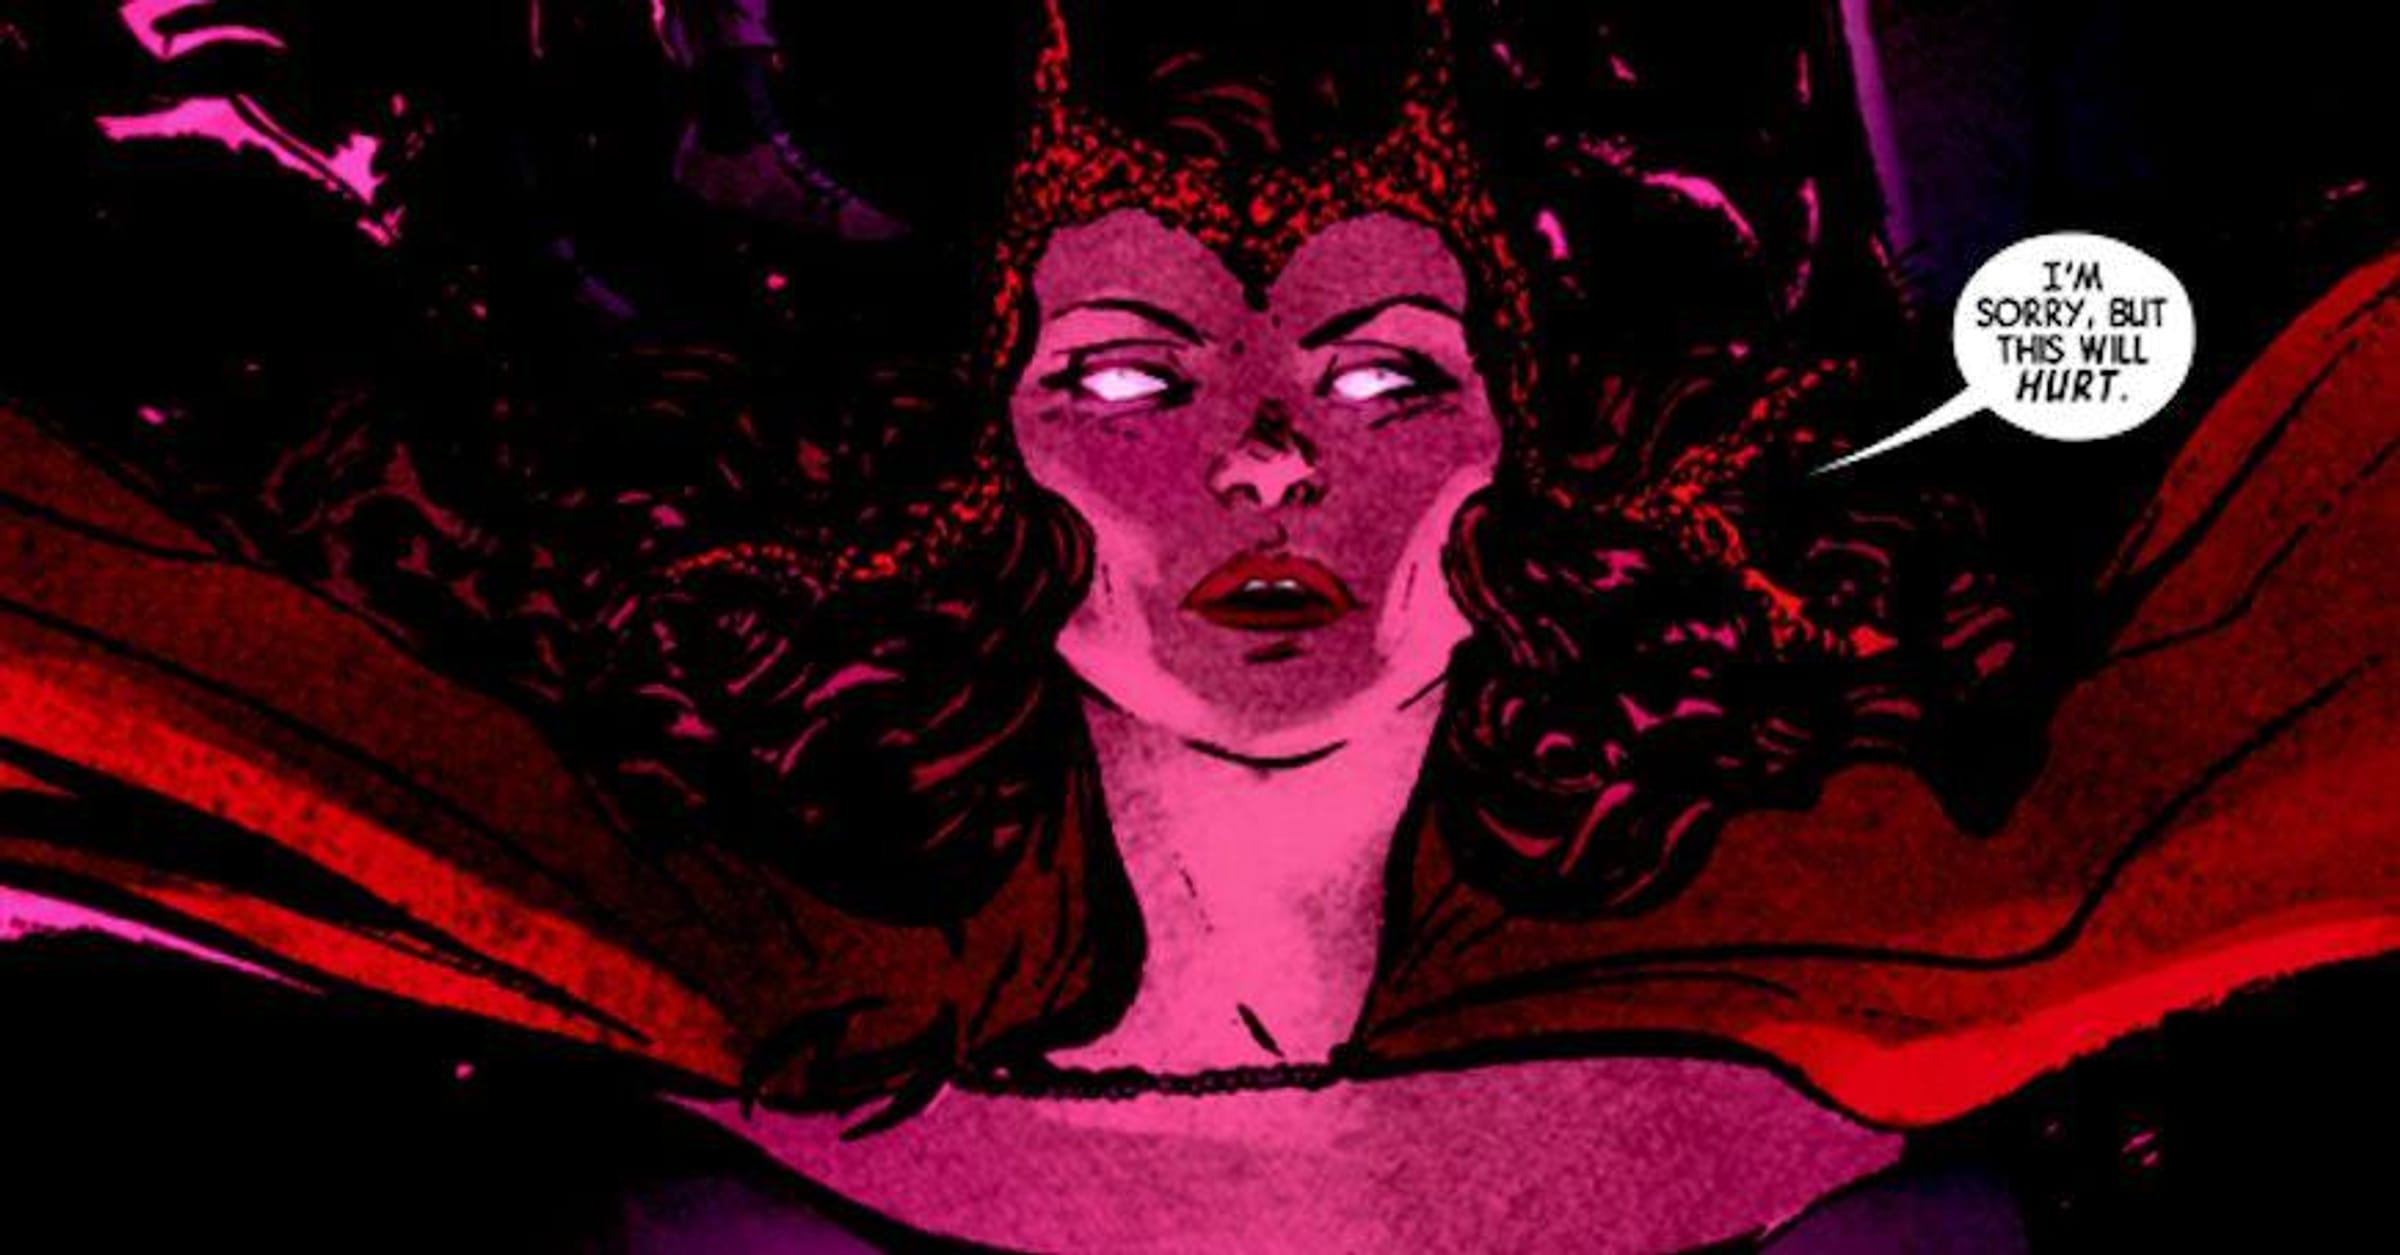 Avengers: Age of Ultron': Scarlet Witch's Tragic Comic Book Career